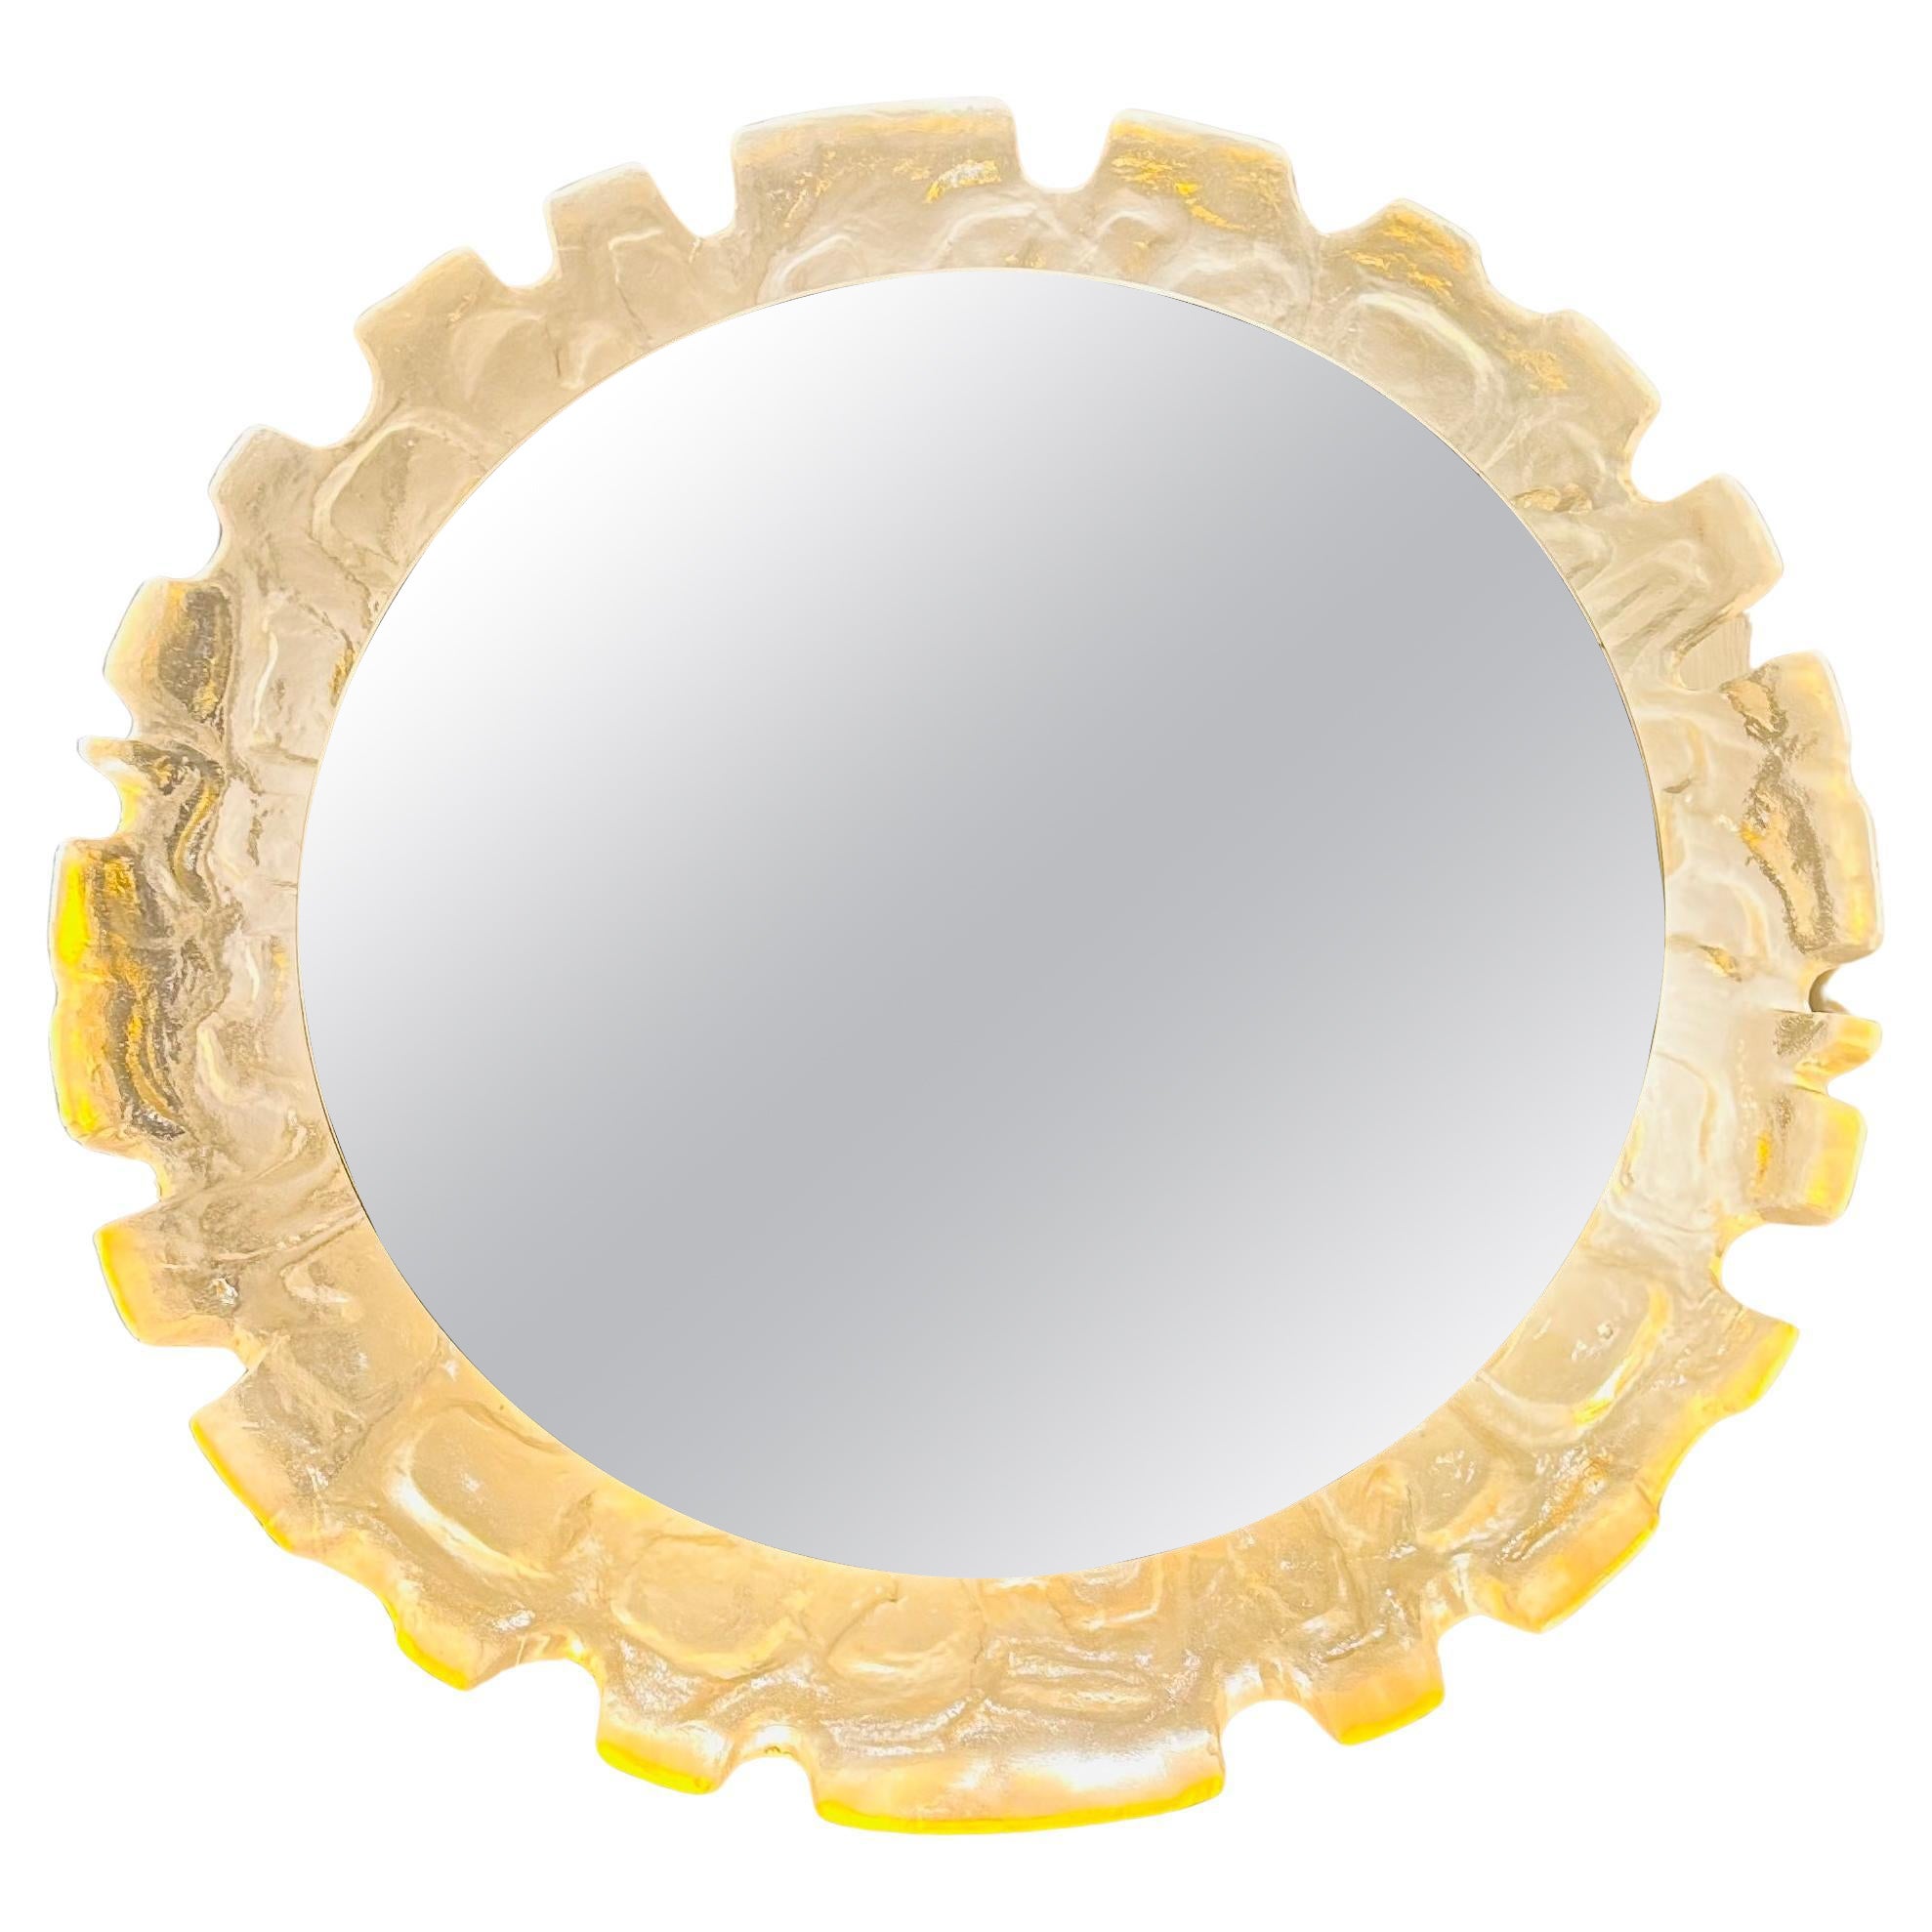 1960s German Erco Illuminated Lucite Yellow Glow Mirrored Glass Wall Mirror For Sale